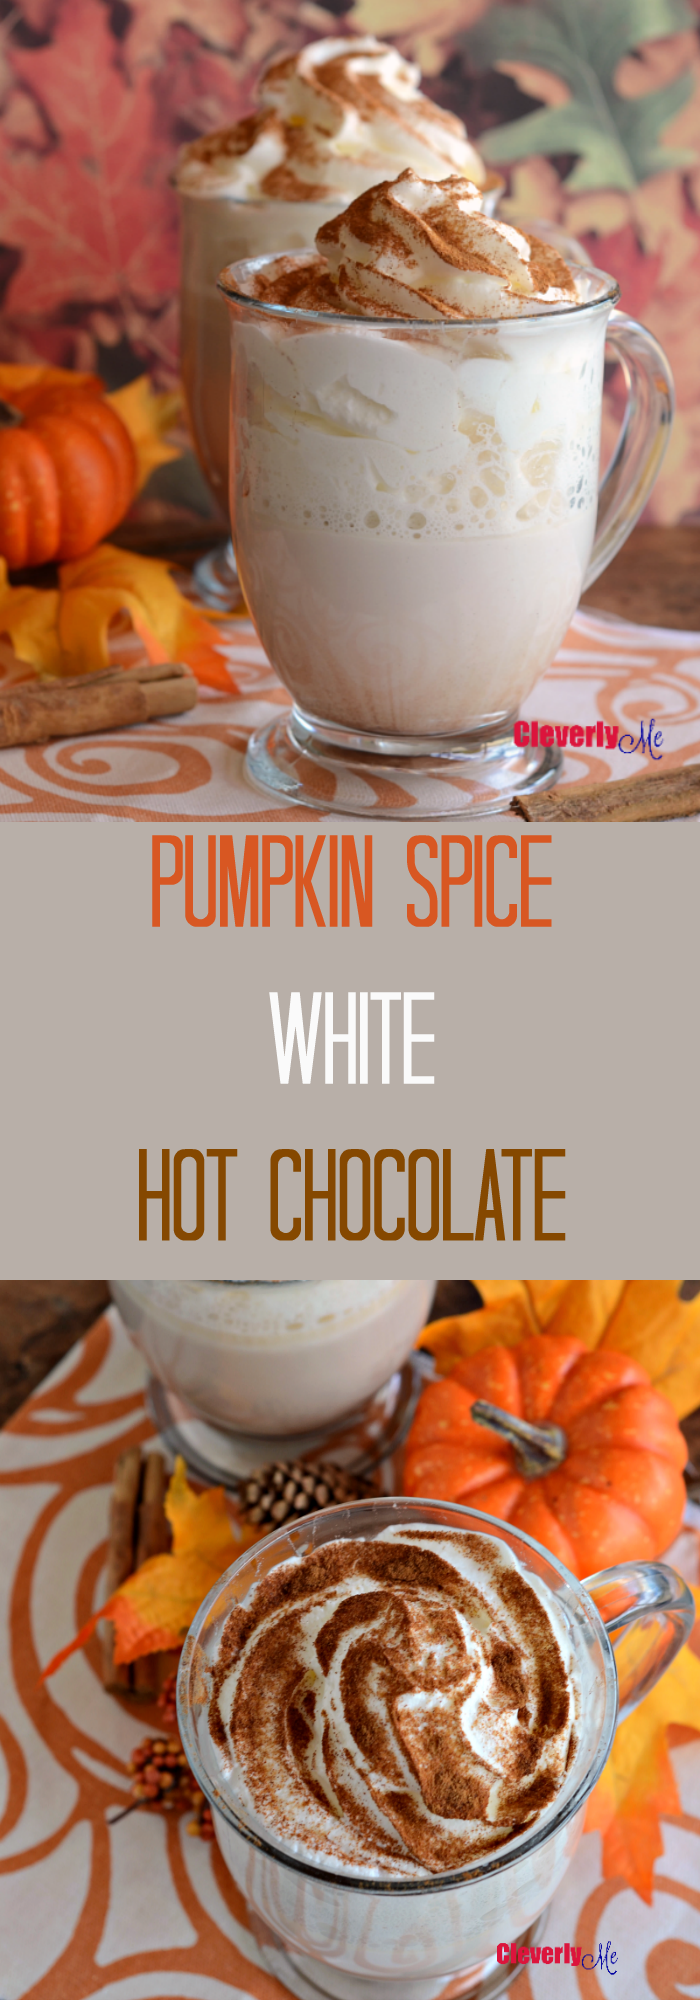 This rich and creamy Pumpkin Spice White Hot Chocolate drink is absolutely the perfect treat to enjoy during the fall season. Get the recipe at CleverlyMe.com